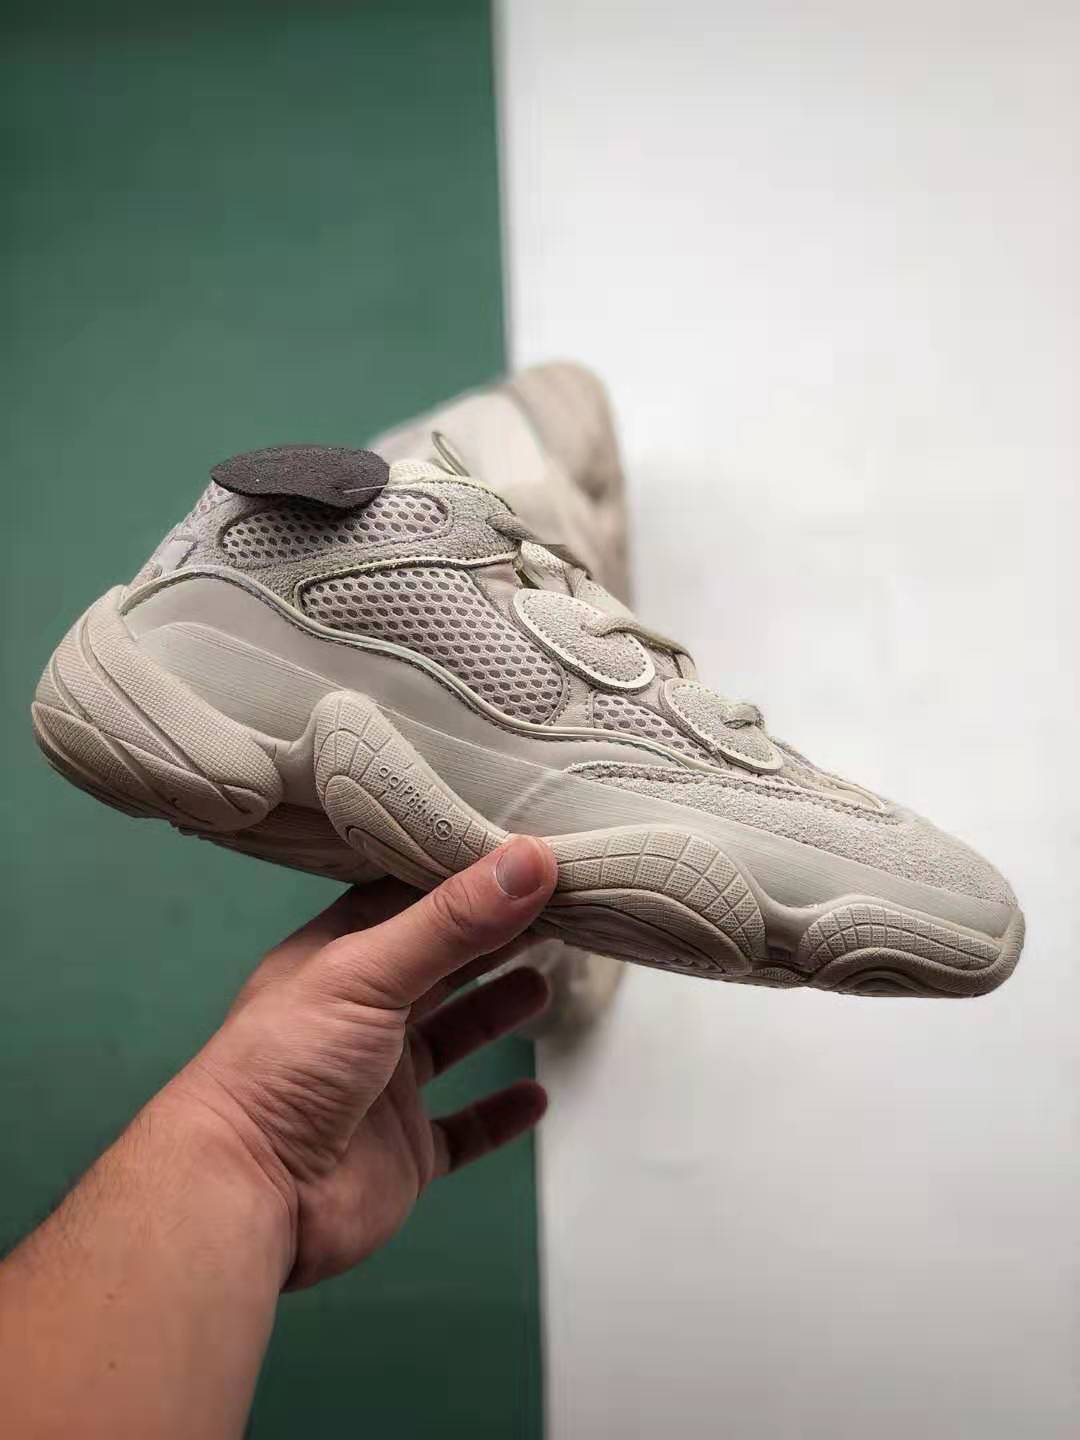 Adidas Yeezy 500 Blush DB2908 - Shop the Latest Yeezy Collection